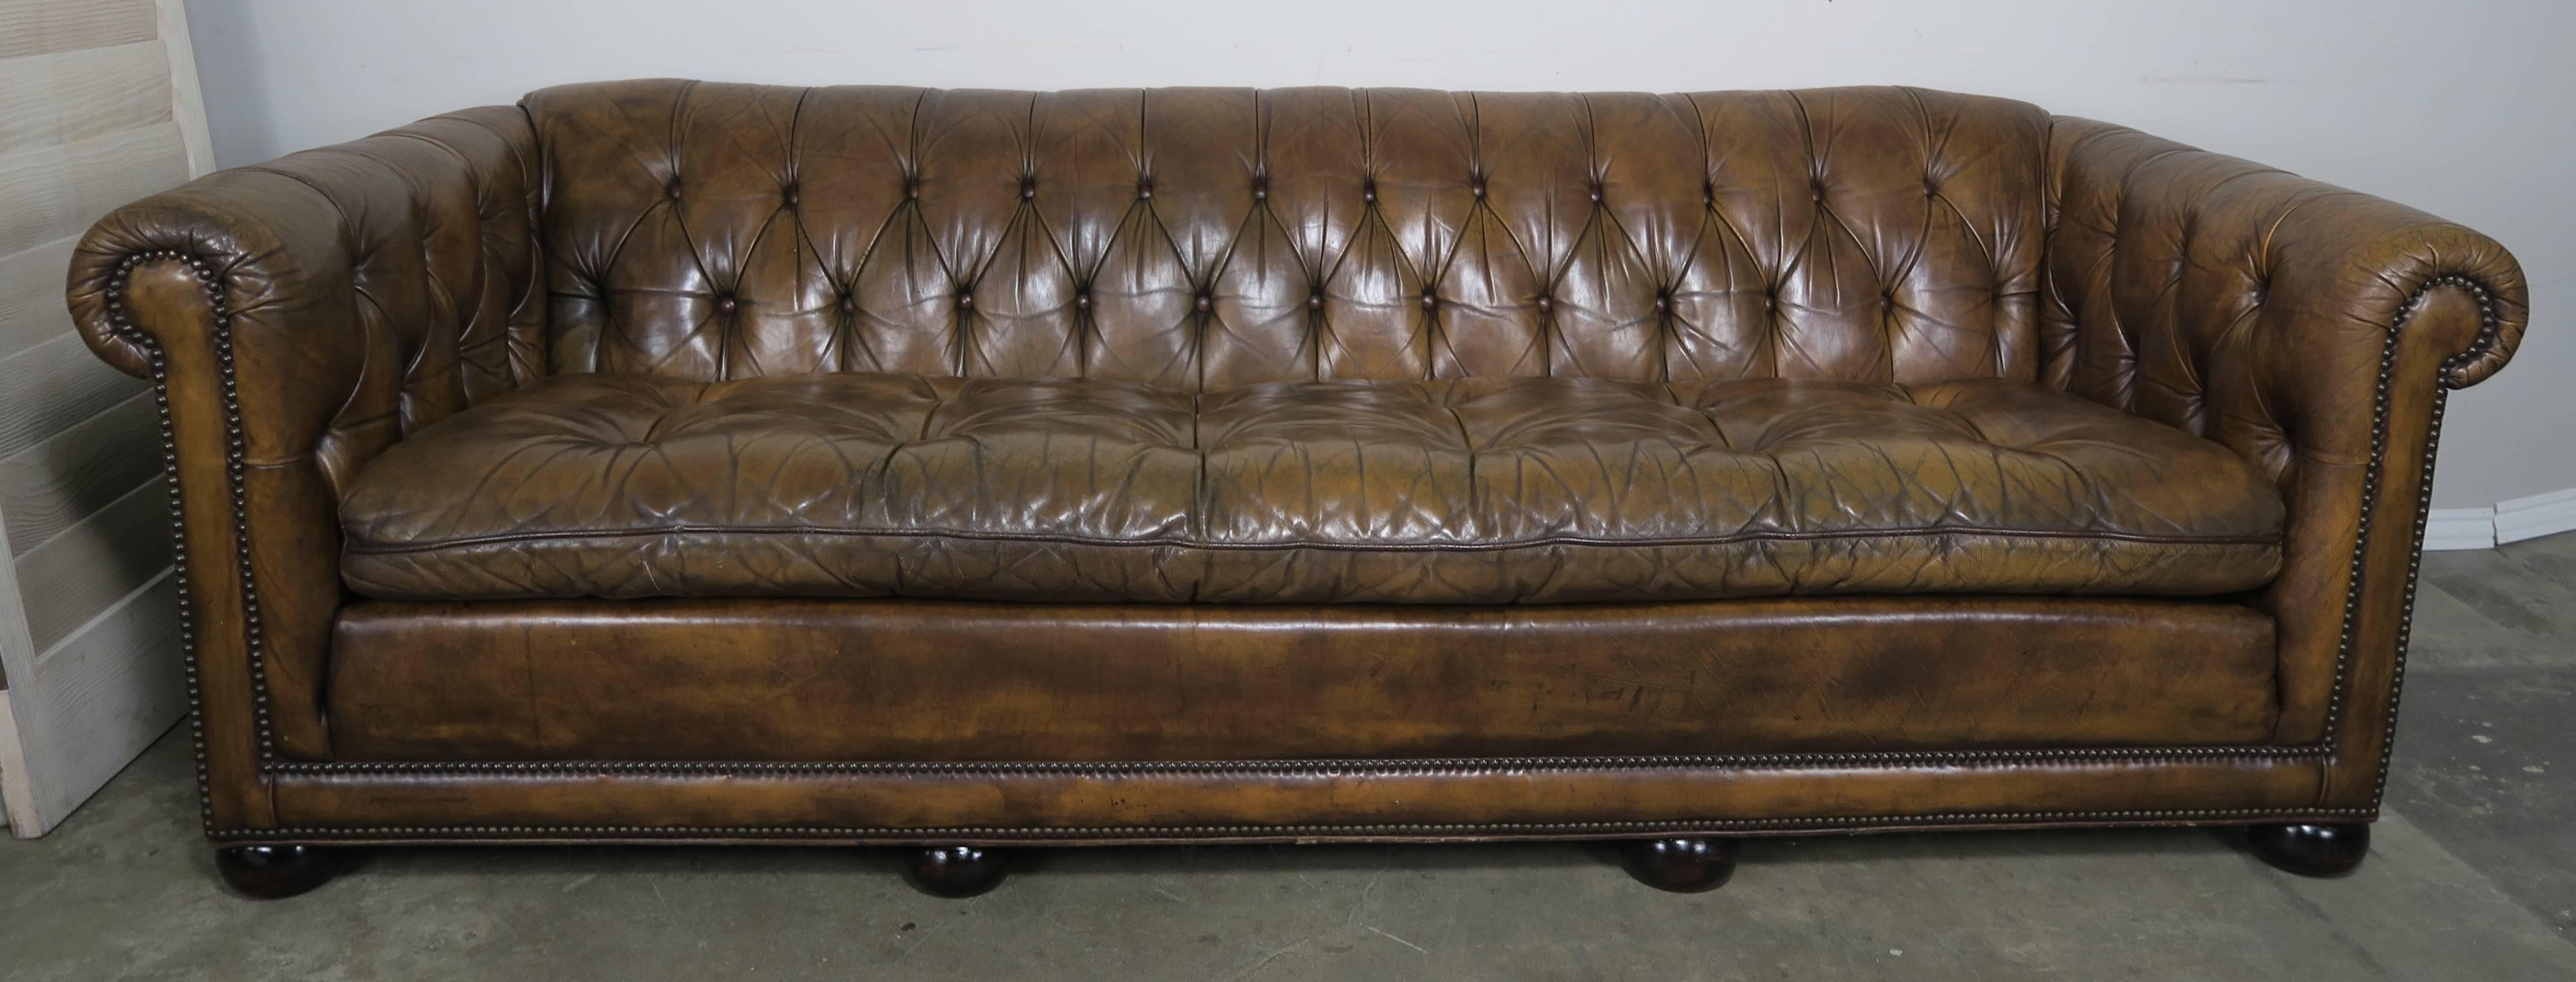 English Tufted Leather Chesterfield Style Sofa, 1930s 1